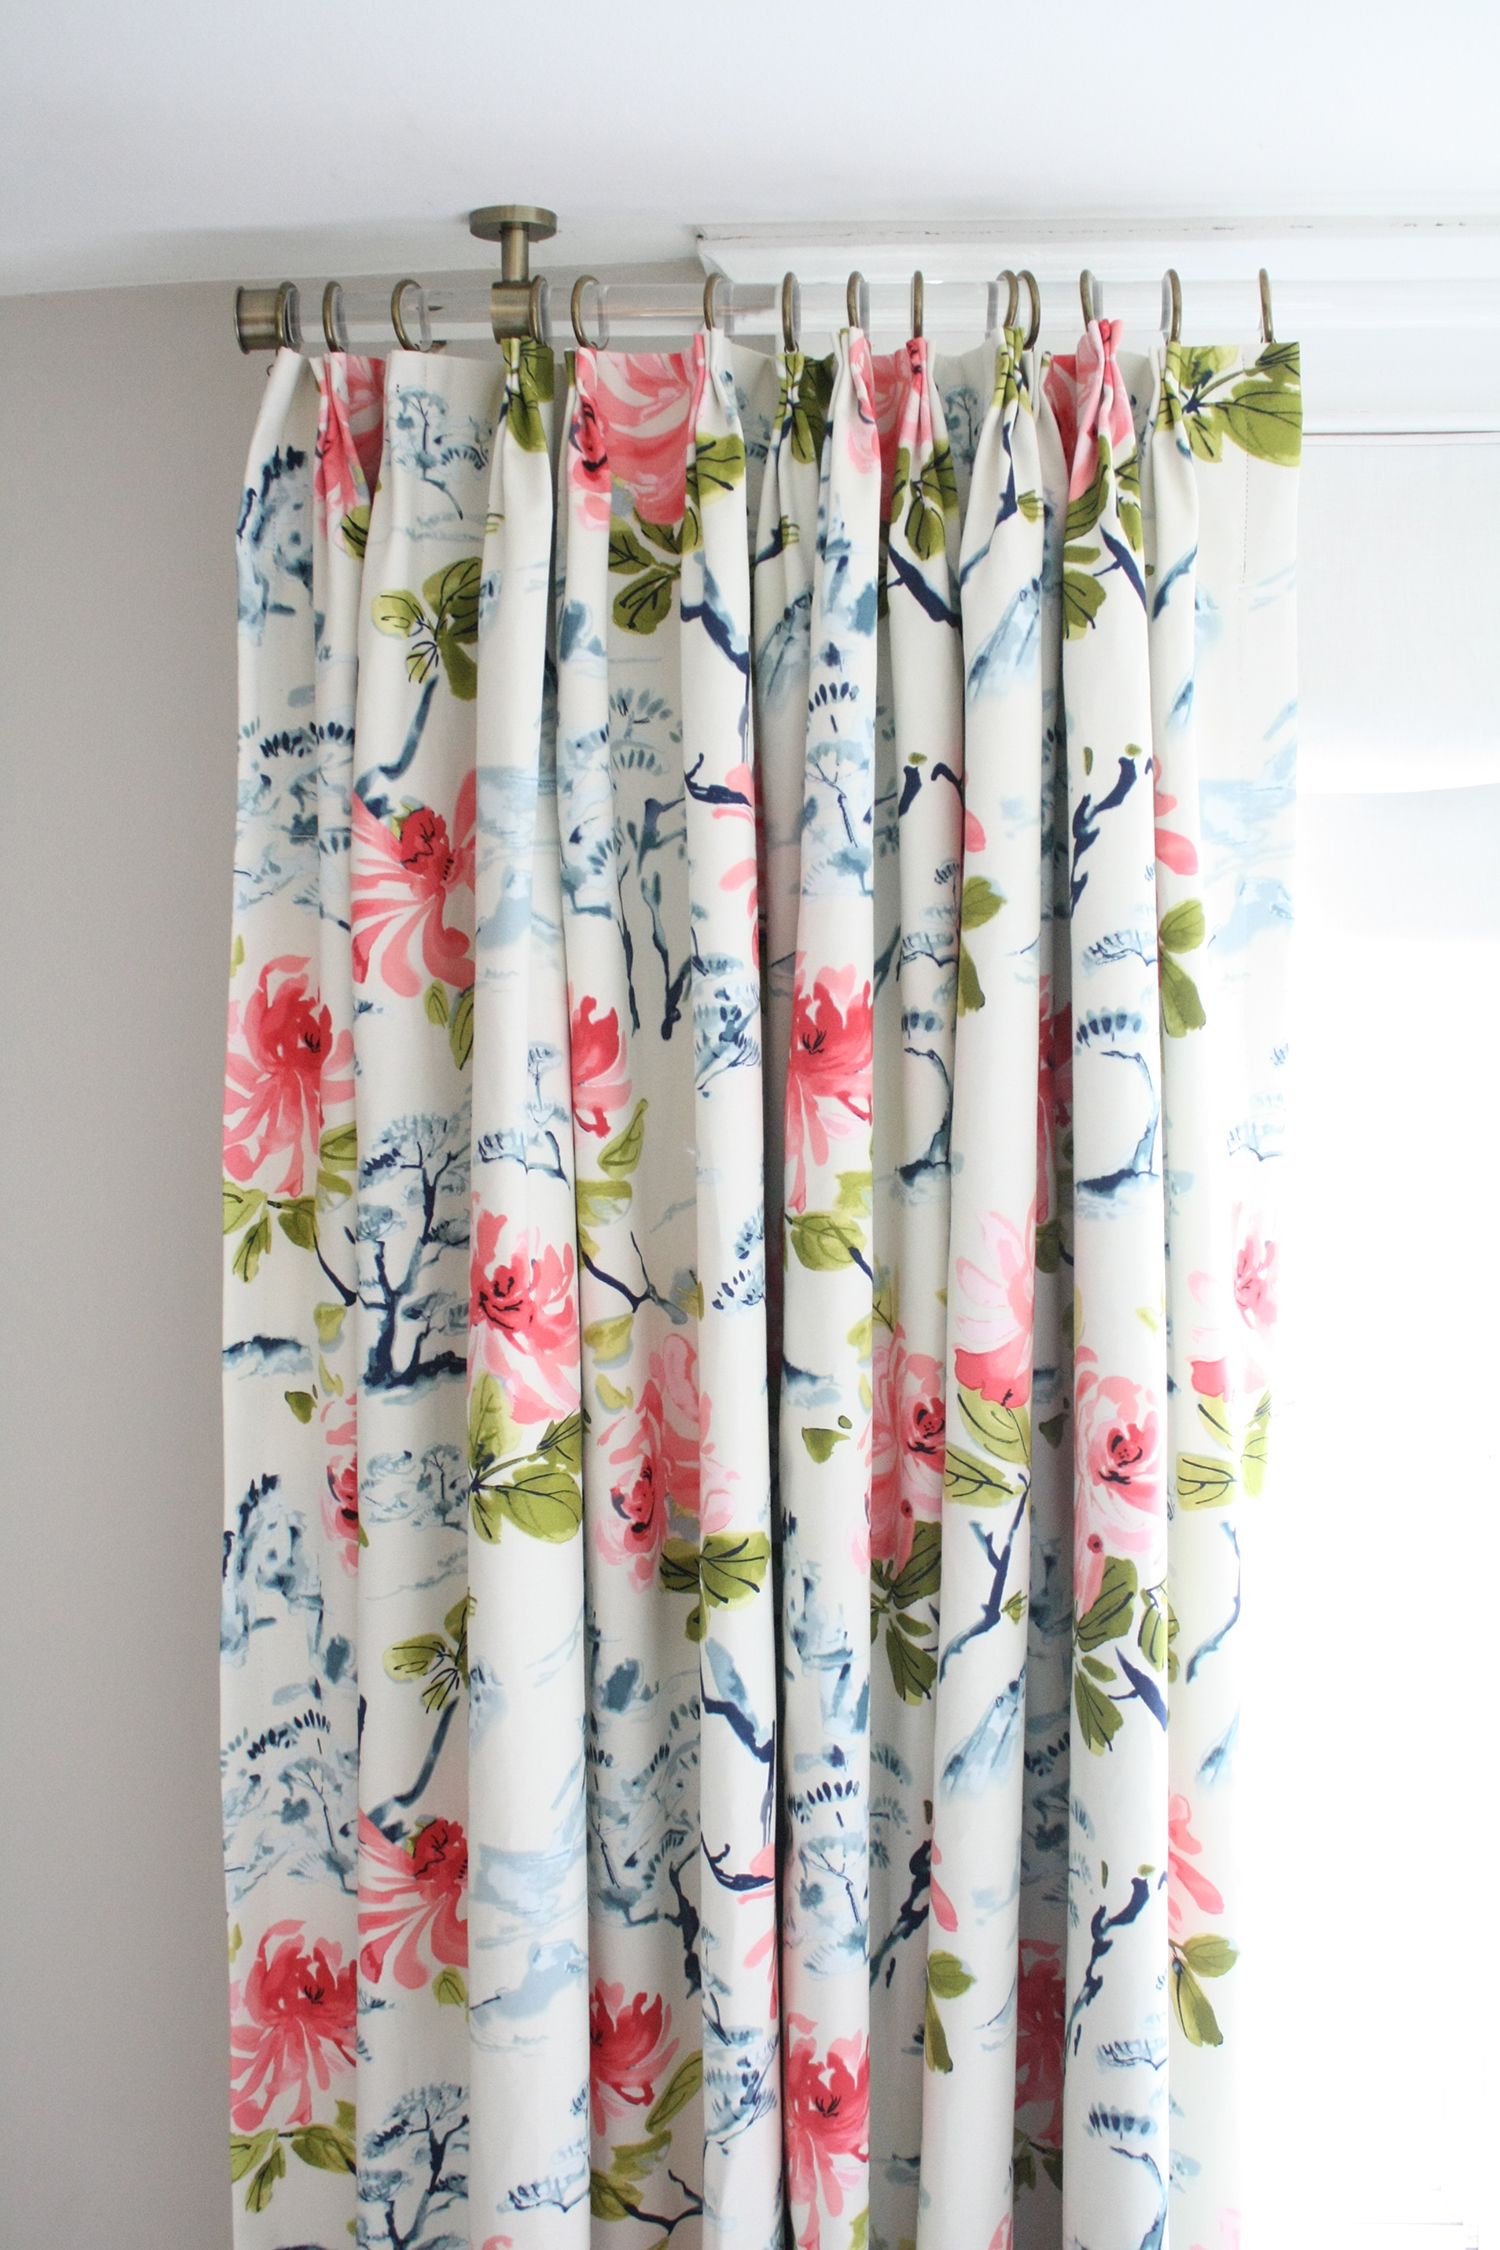 stunning floral curtains with pink peonies + indigo blue bonsai trees made  by www.Traveller Location (click for more info)